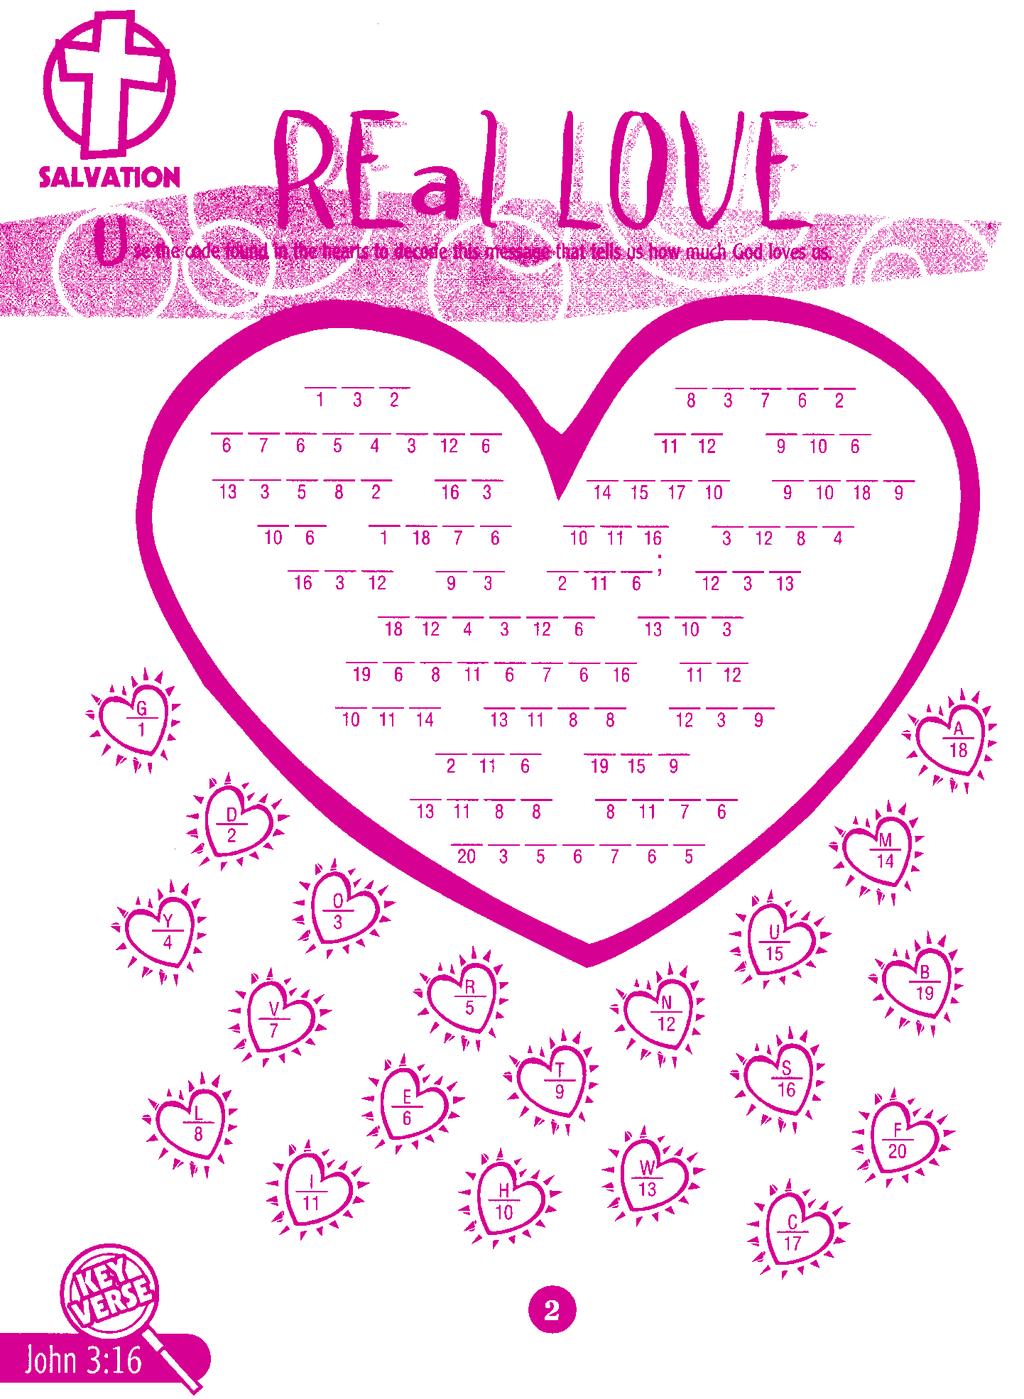 Use the code found in the small hearts to decode this message that